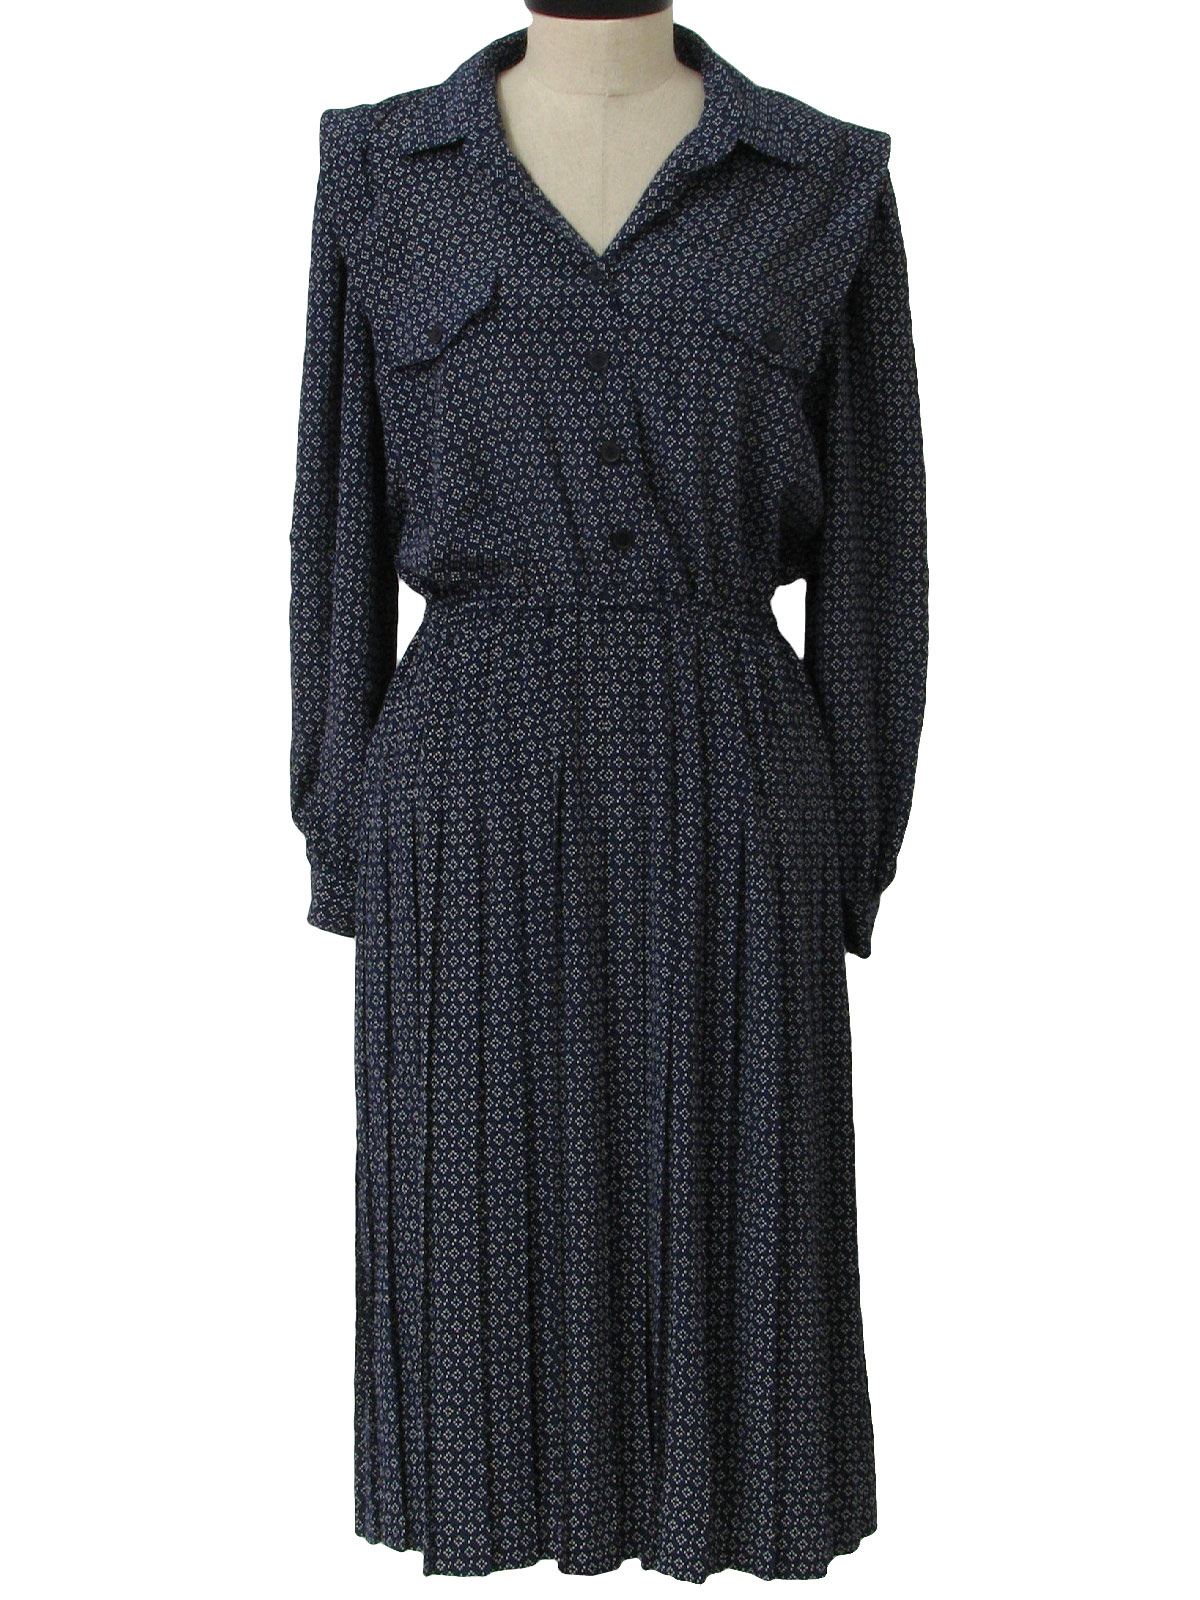 Vintage 1980's Dress: 80s -Leslie Fay Petites- Womens navy blue and ...